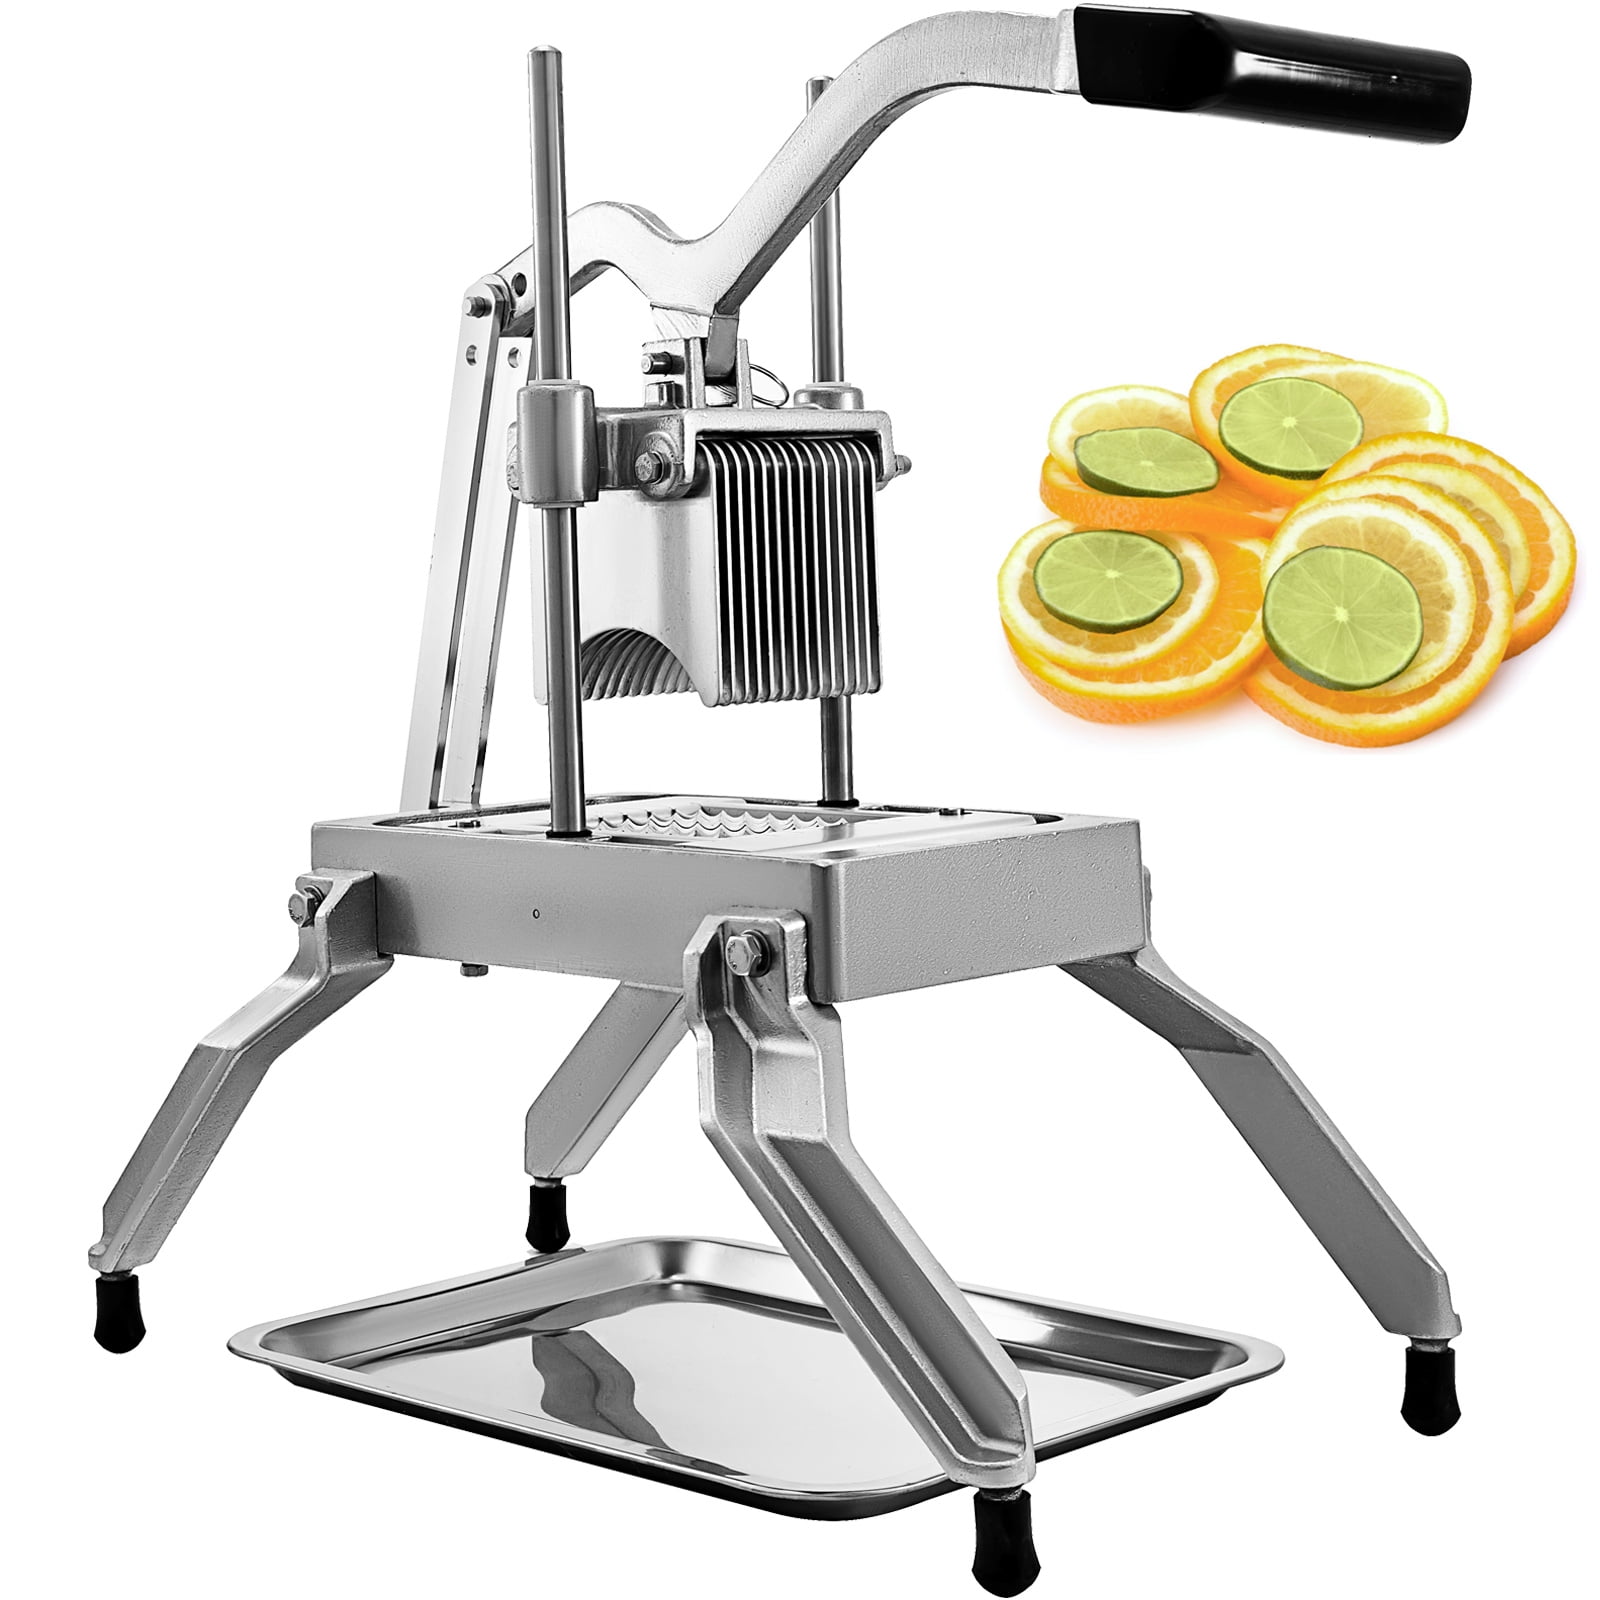 TUNTROL Manual Commercial Vegetable Dicer, 1/2 S-Steel Blade Fruite Potato  Onion Chopper Cutter, Much Sharper, Aluminum Frame Strong and Duarable